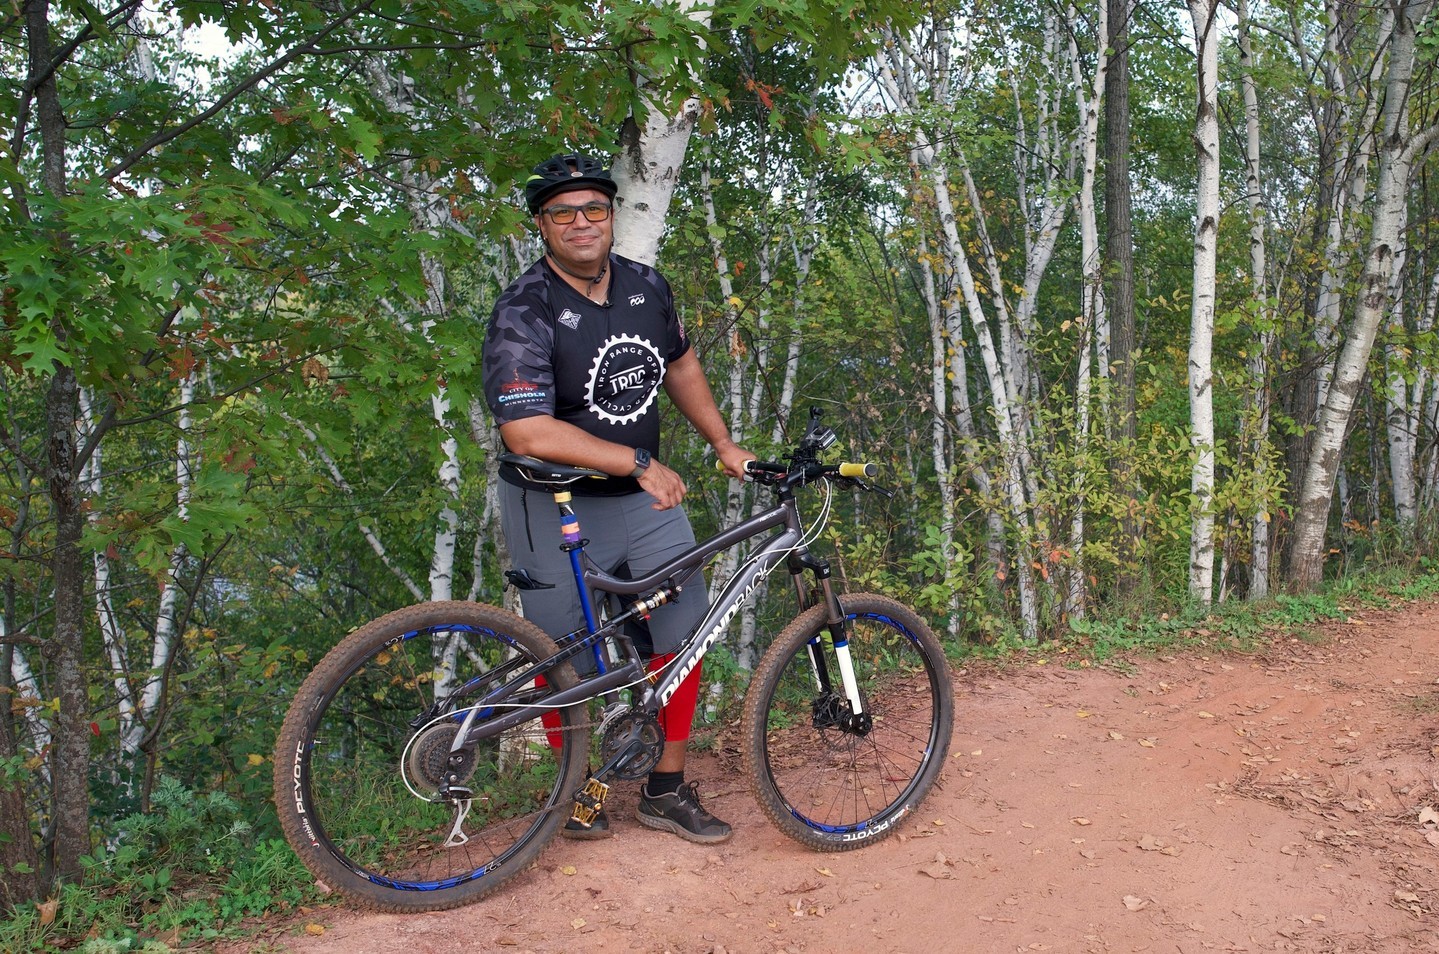 Meet Gunnar Carlson, President of @morcpics and he is inspiring greater love and stewardship on the trails of Minnesota. ⁠⁠A few ways Gunnar #CaresForPlace:⁠⁠️ Finds new opportunities to partner with land managers and professional builders to bring new trails to a community ⁠⁠️ Works with partners to manage a natural space and ensure it continues to be a healthy outdoor space for everyone’s benefit ⁠⁠️ Removes invasive species and supports the healthiest native natural areas ⁠⁠Gunnar says "I love these types of natural moments and I want to do all I can to ensure everyone who wants to get away and enjoy nature while also remaining close to home can easily do so." Read the full blog post via the link bio. — from Instagram